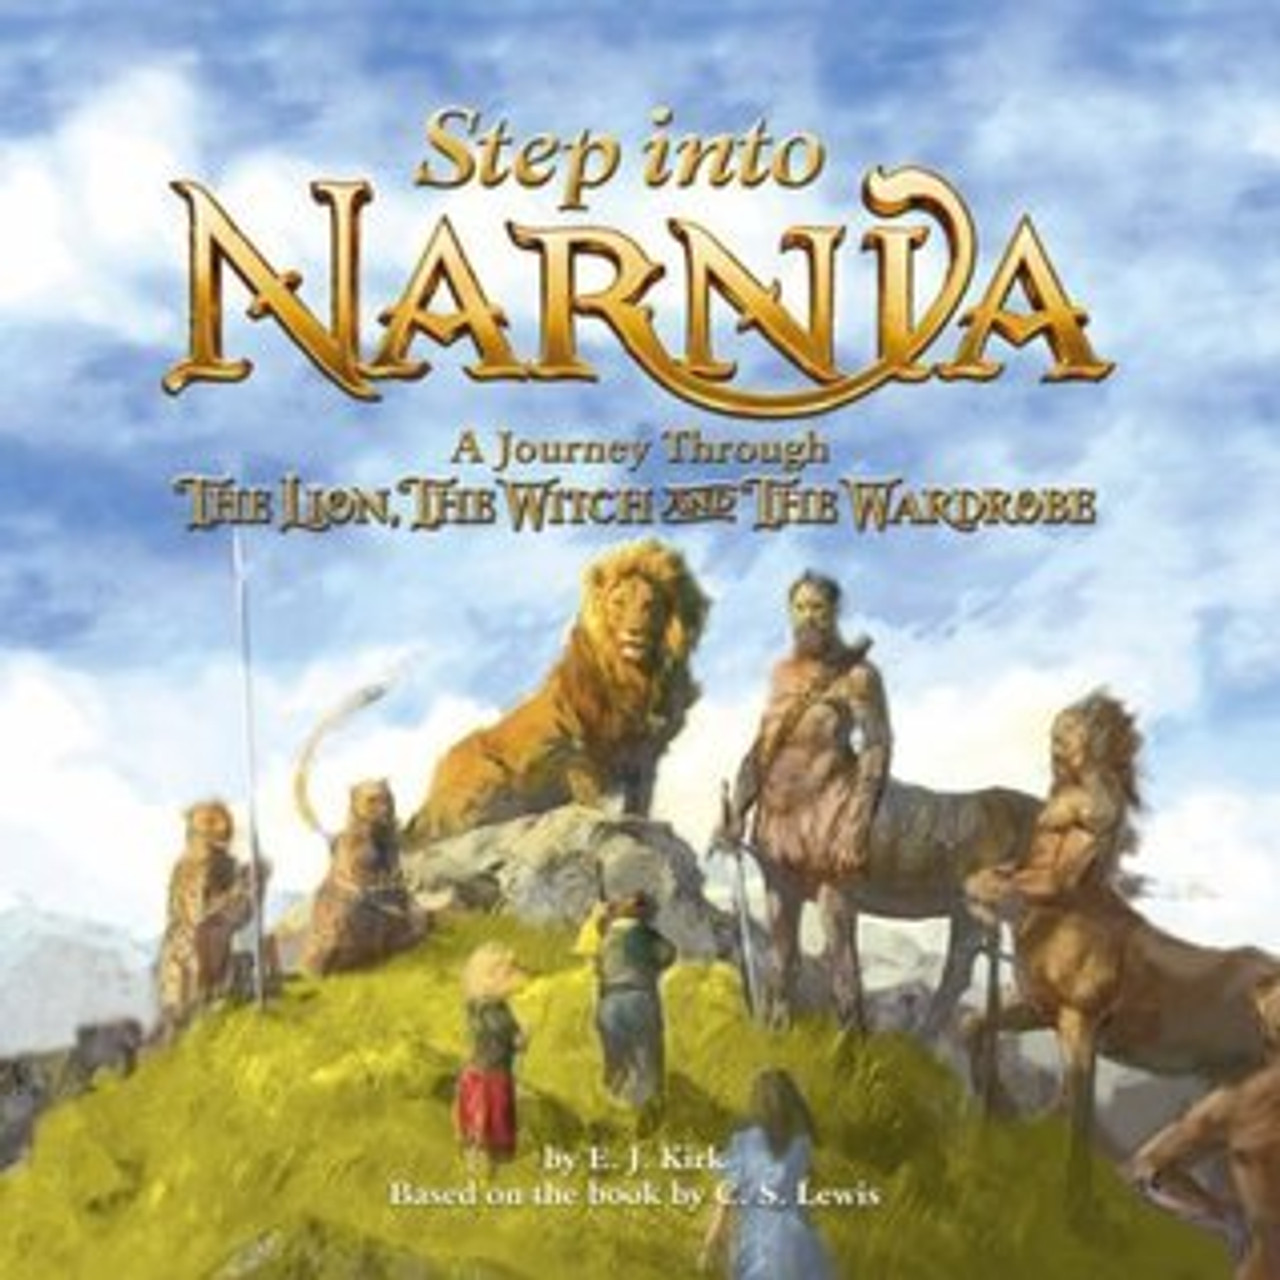 E.J. Kirk / Step Into Narnia: A Journey Through the Lion, The Witch and The Wardrobe (Children's Coffee Table book)